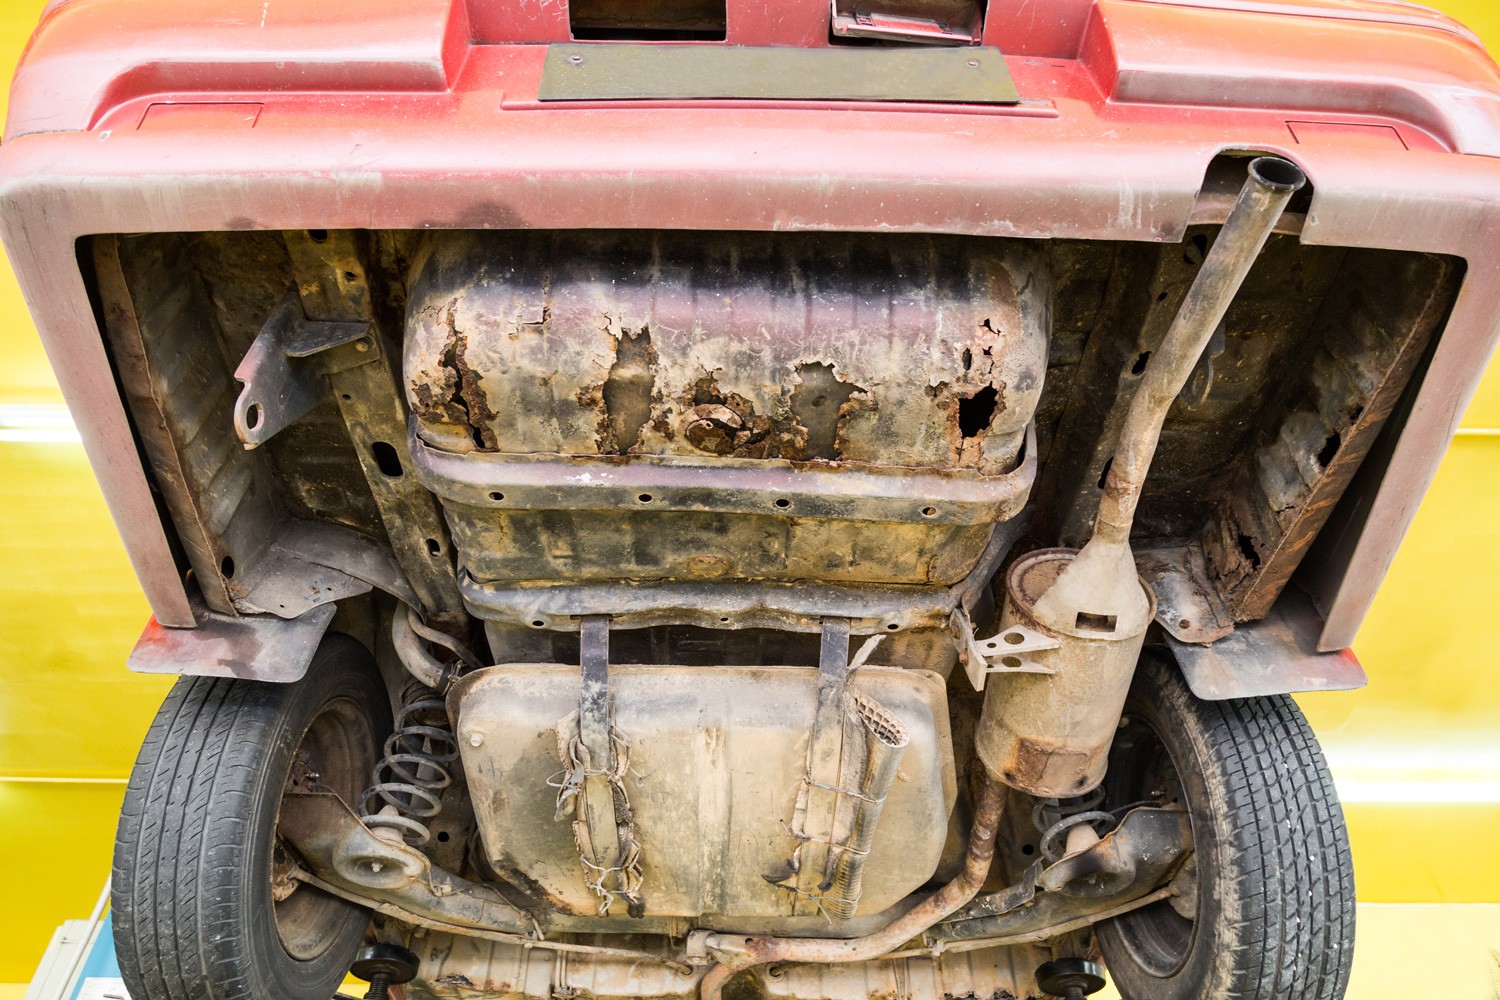 Car with rusty, damaged, corroded undercarriage at workshop for repair work